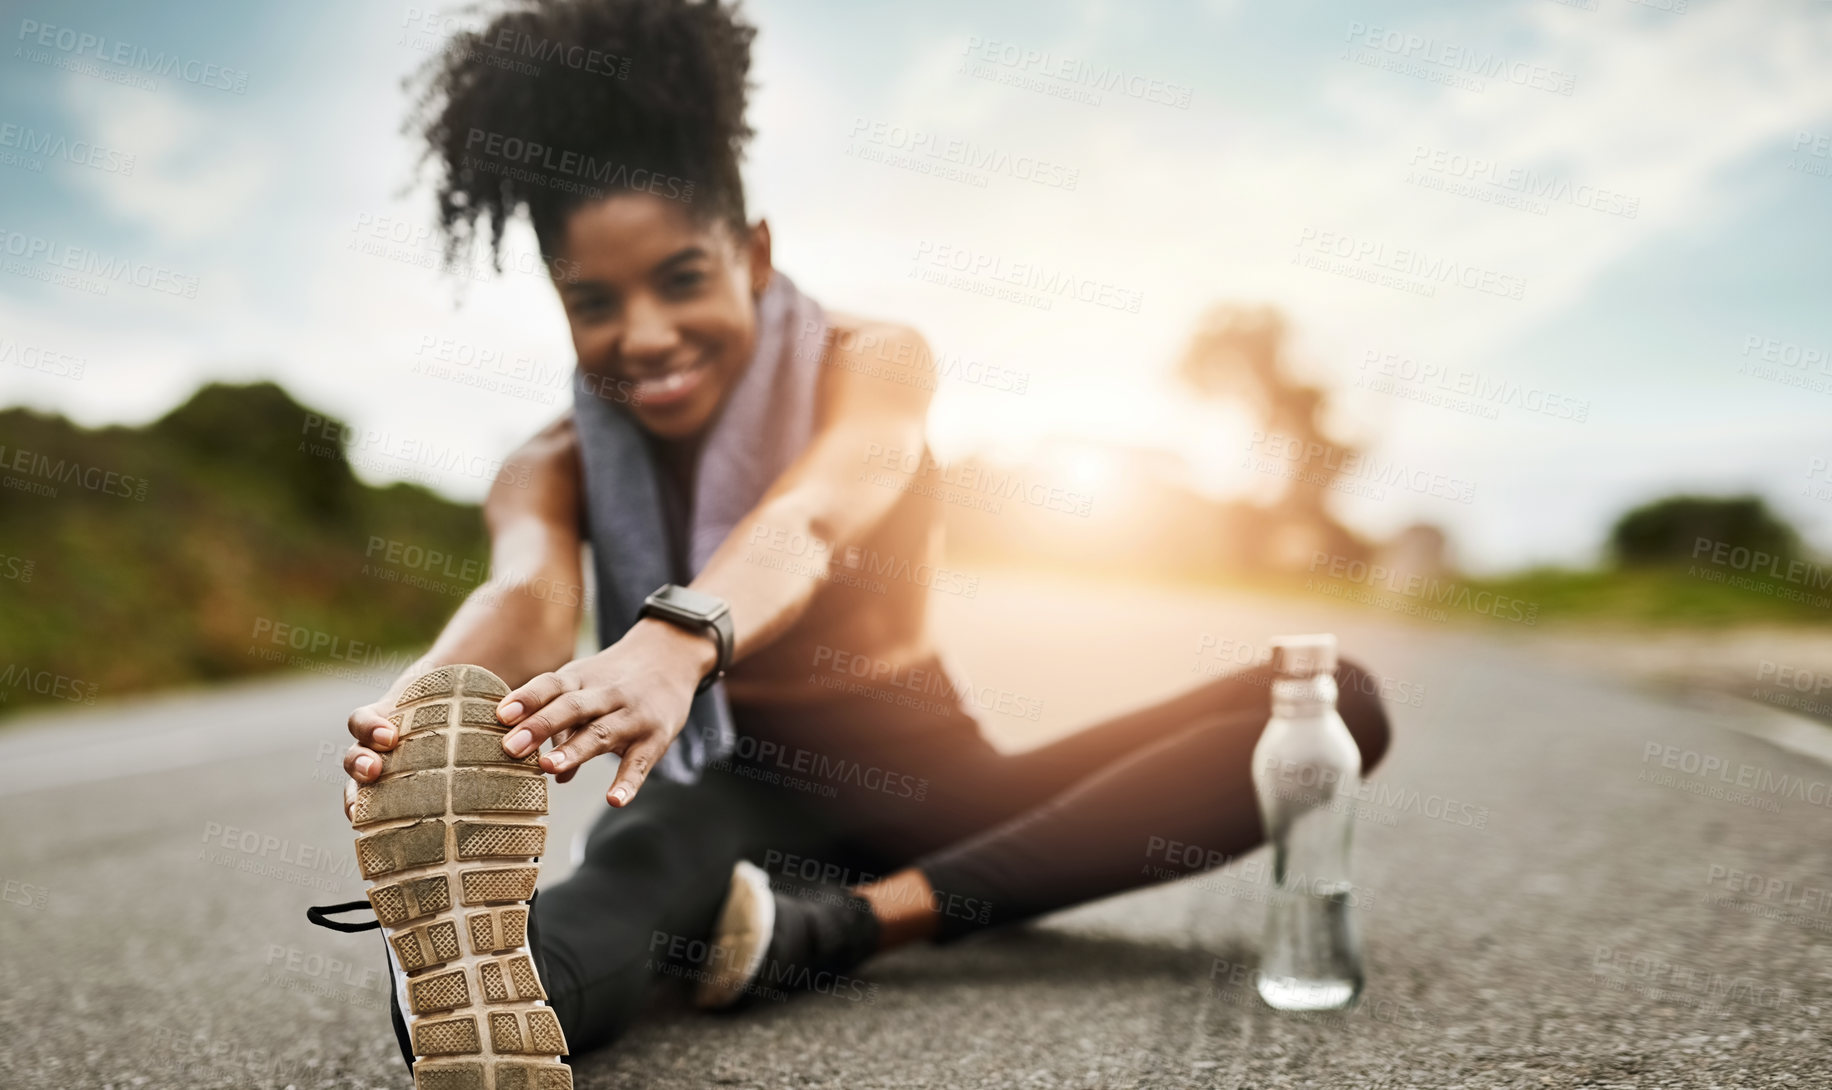 Buy stock photo Portrait of a sporty young woman stretching her legs while exercising outdoors